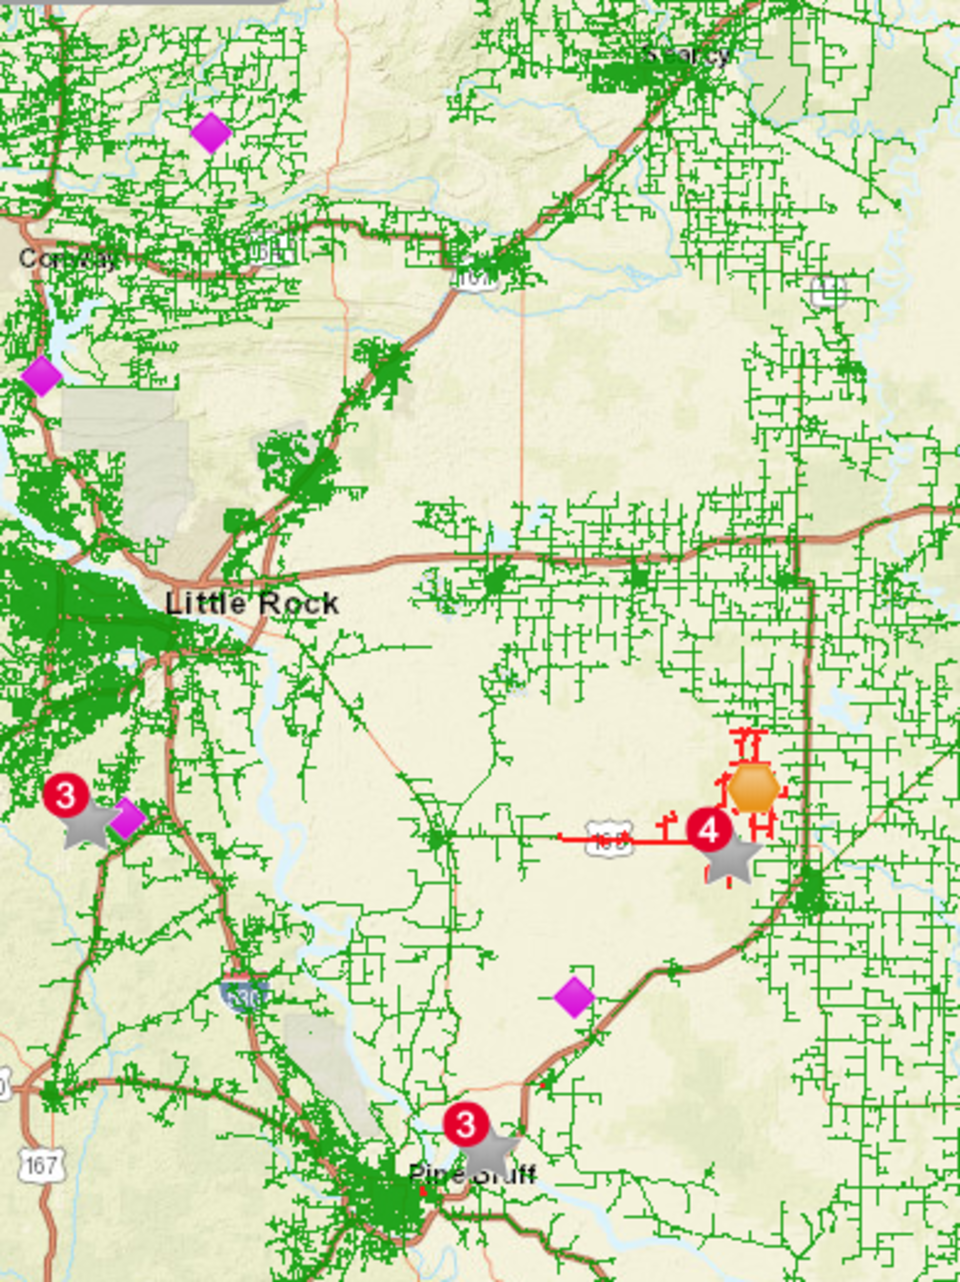 entergy arkansas power outage map Where To Track And Report Power Outages In Arkansas Katv entergy arkansas power outage map